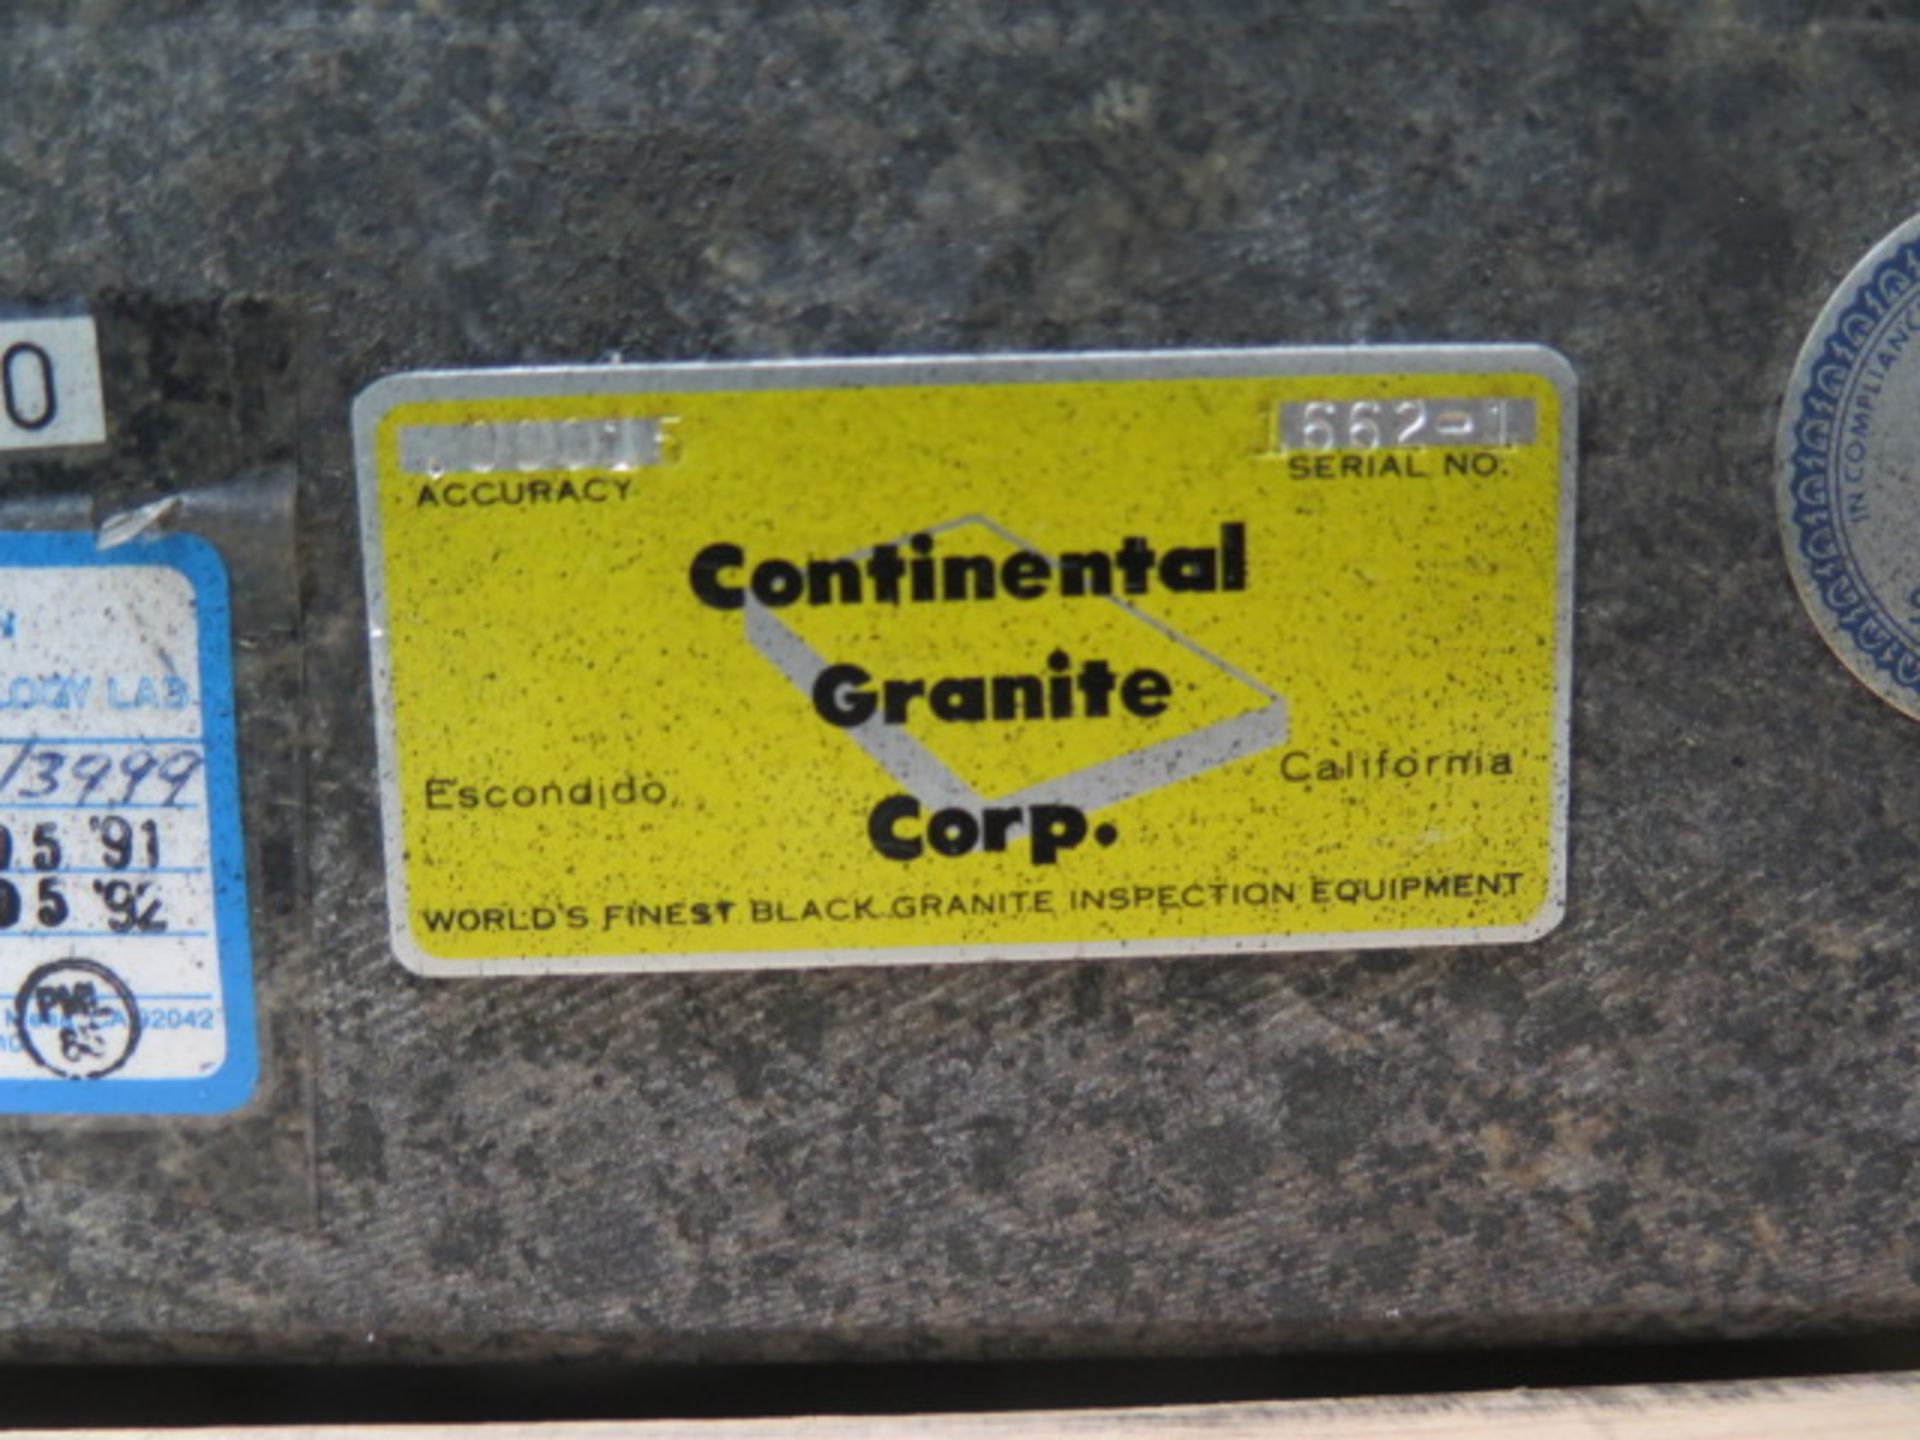 18" x 24" x 4" Granite Surface Plate - Image 3 of 3